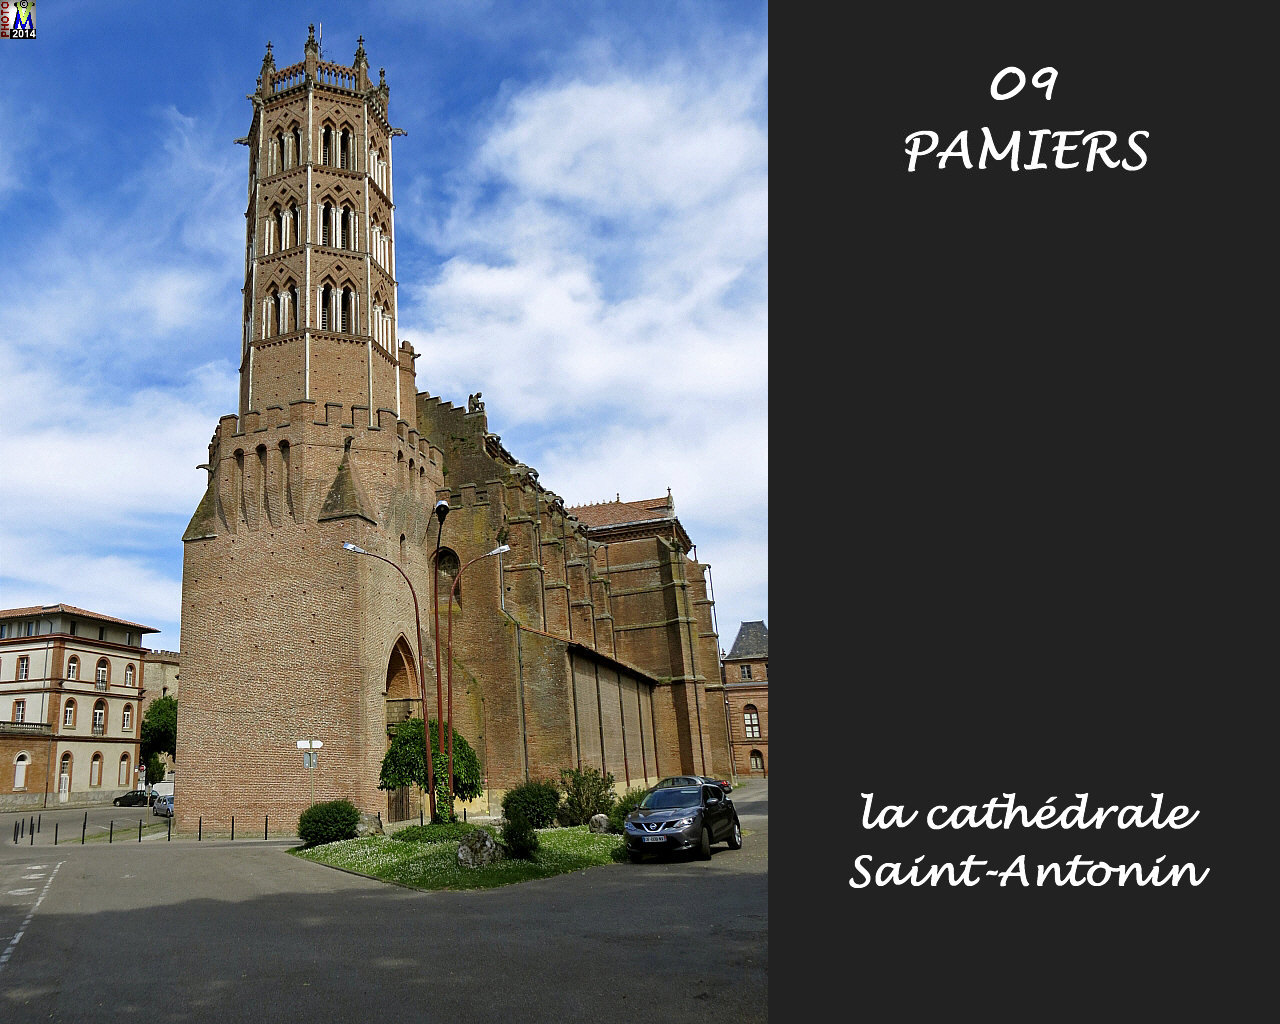 09PAMIERS_cathedrale_102.jpg